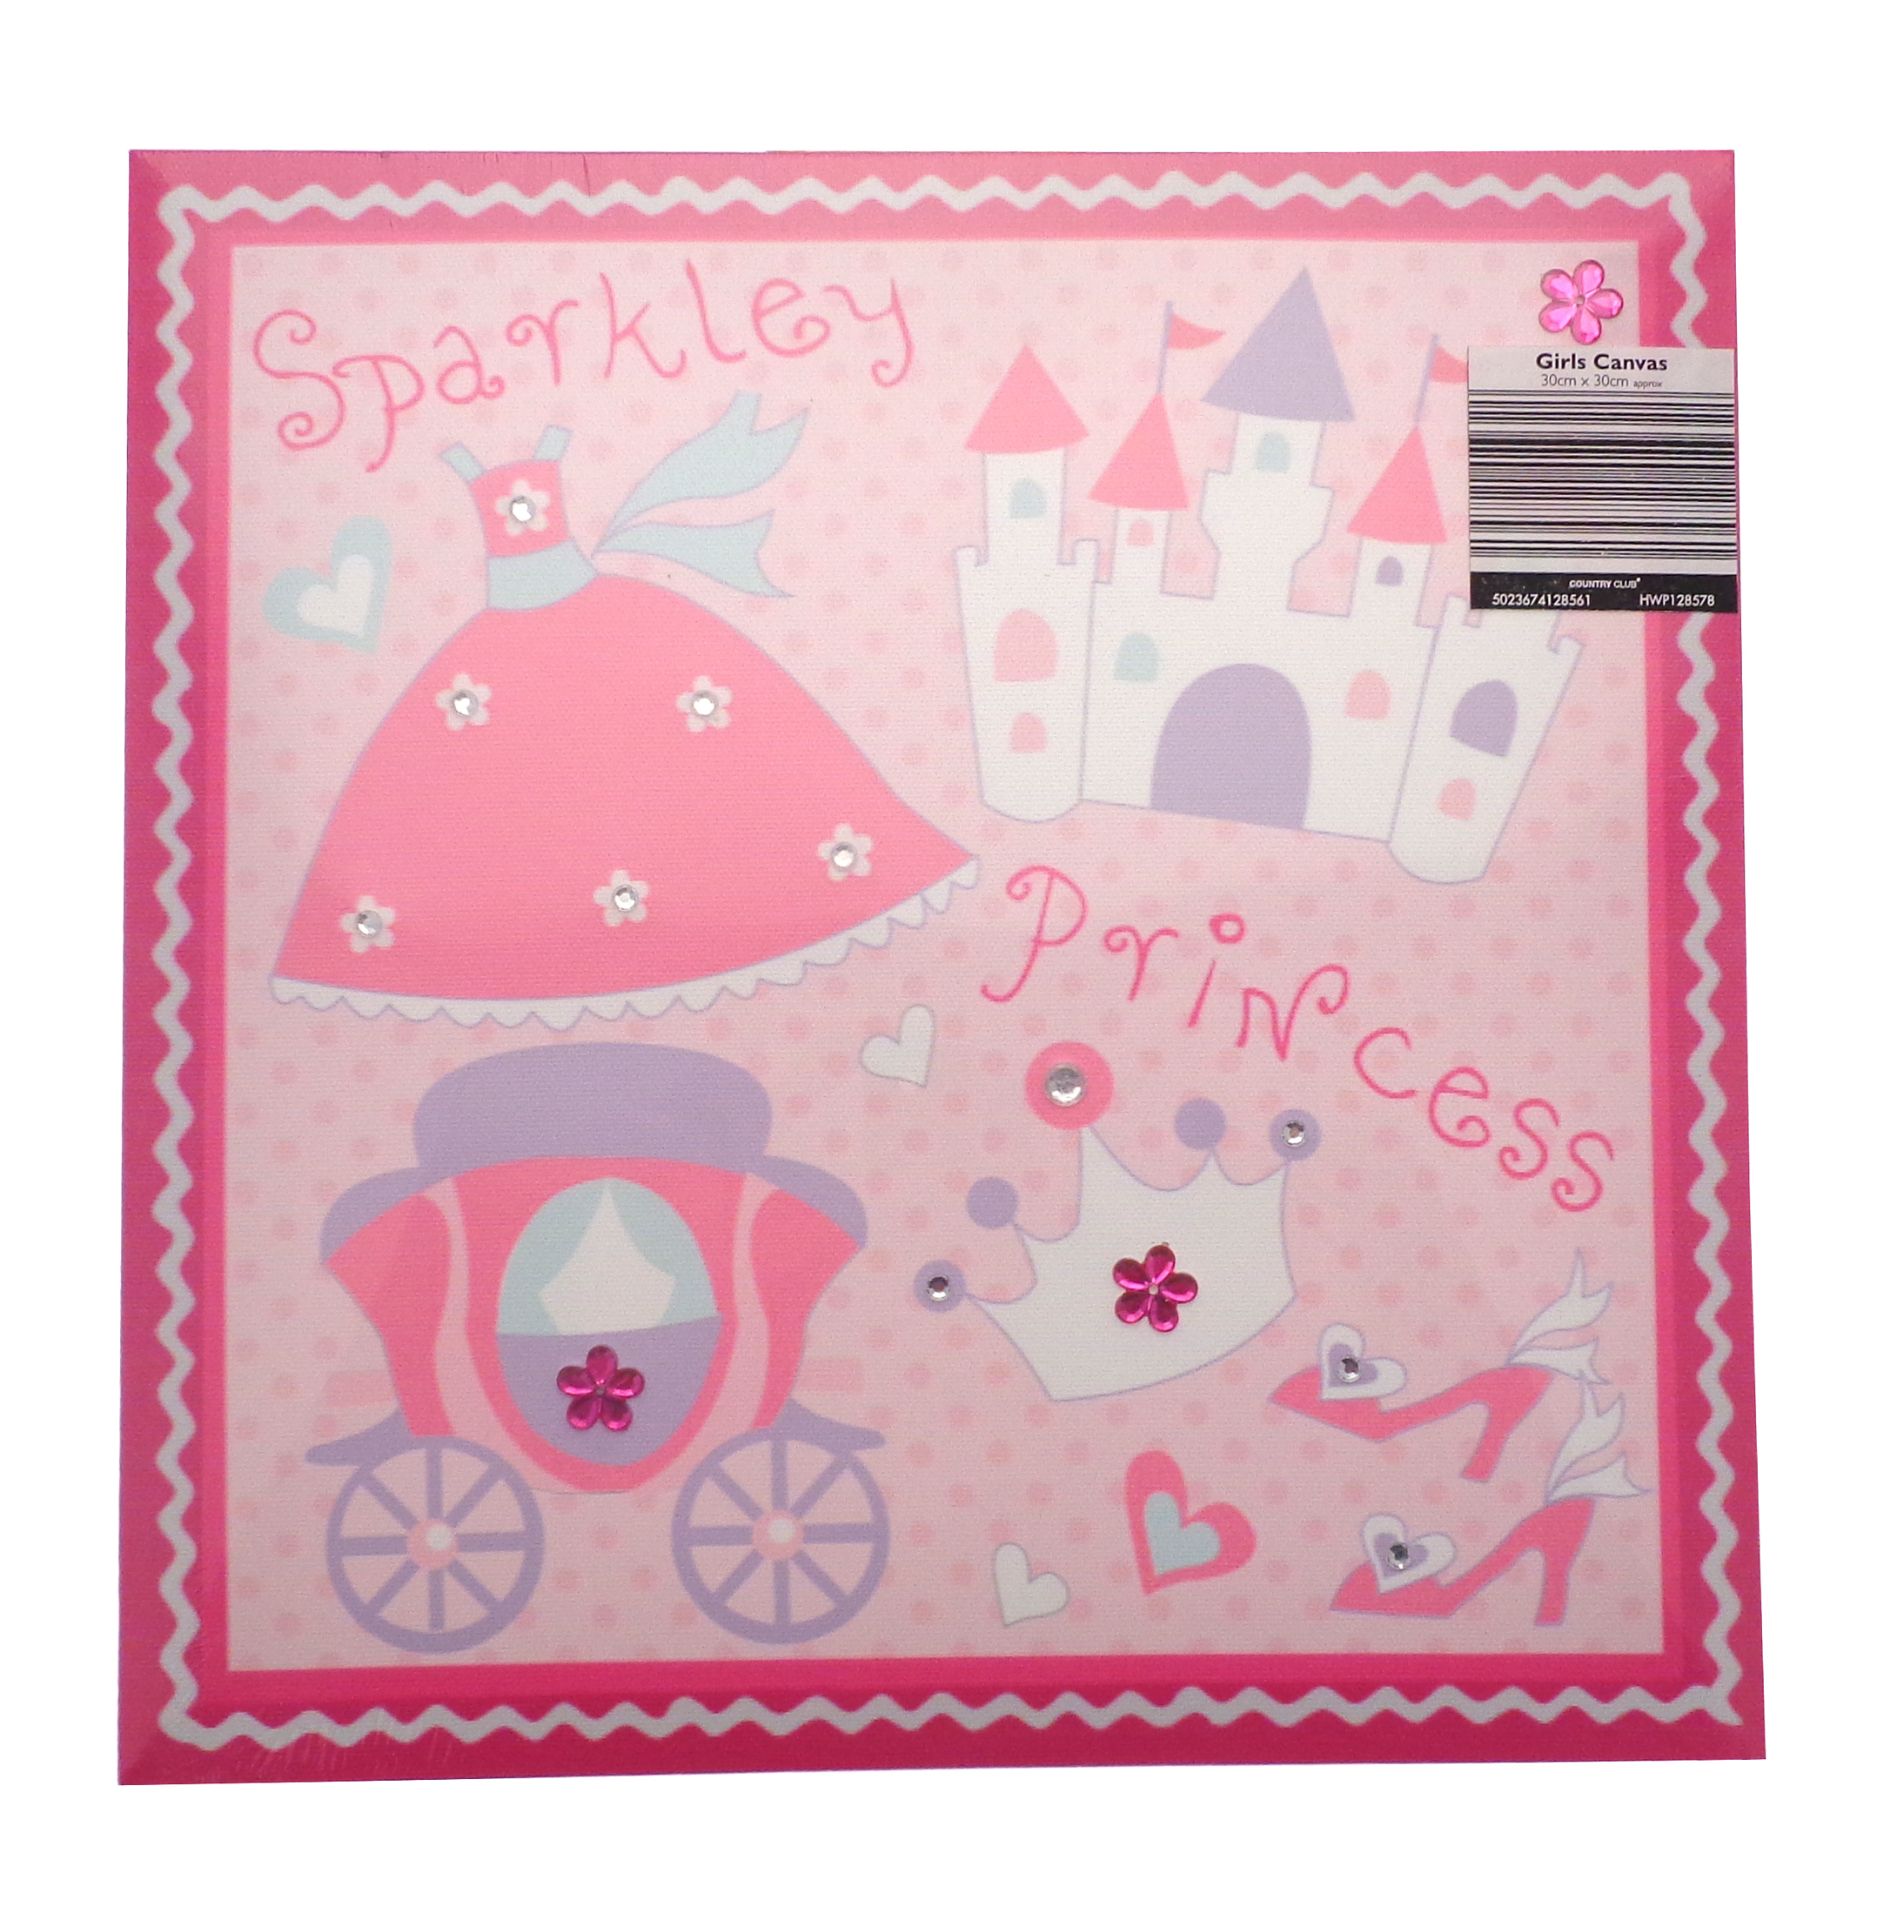 New Square 30 x 30cm Sparkly Princess Pink Canvas